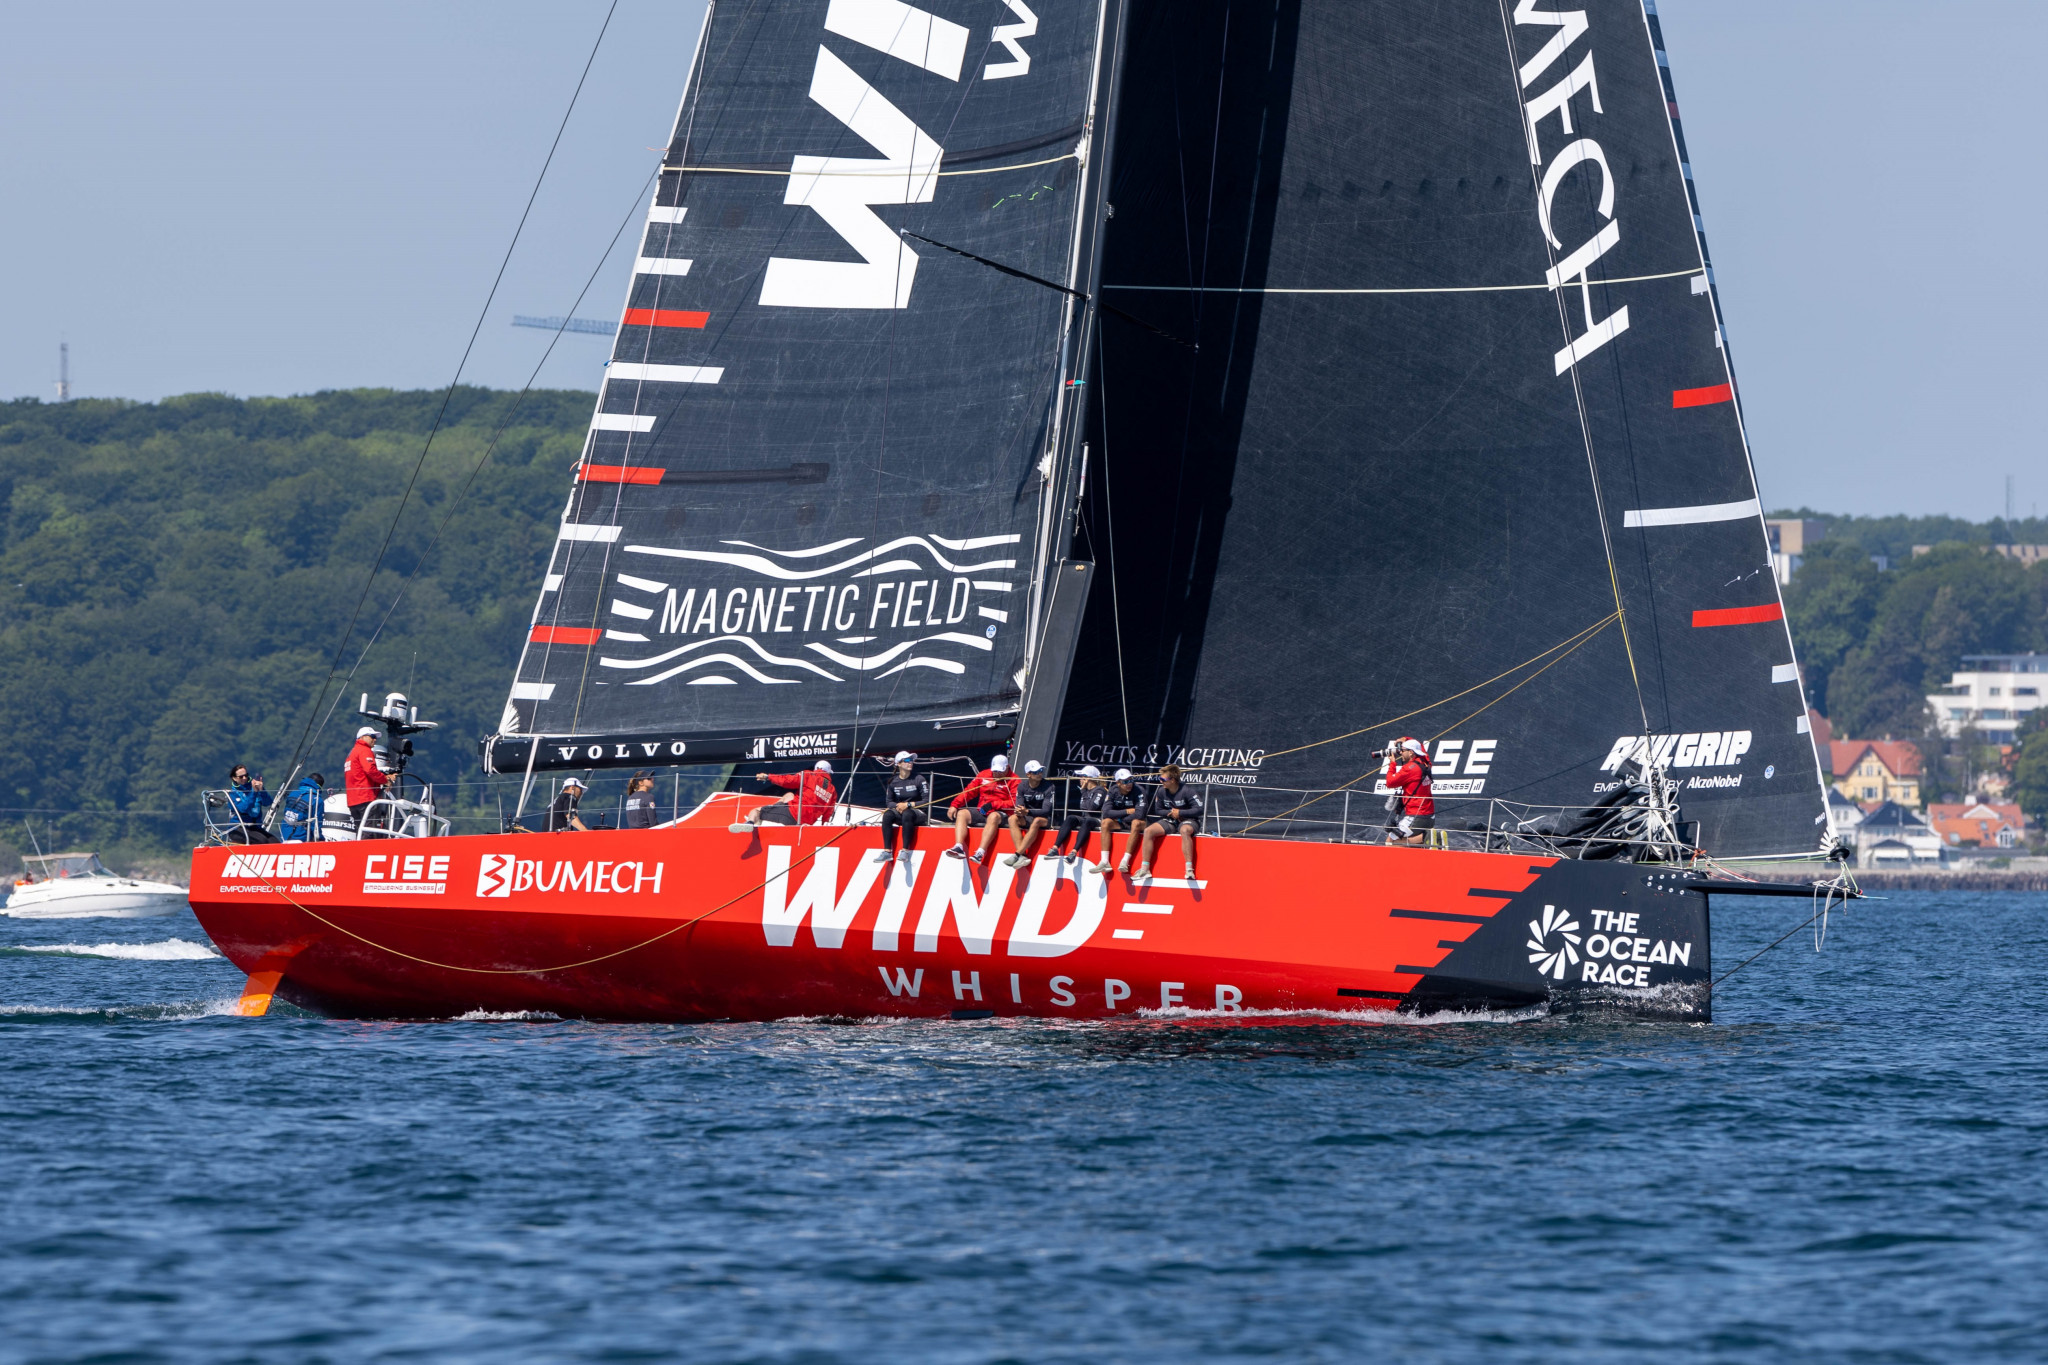 WindWhisper made it back-to-back in-port victories with success in Aarhus ©Peter Broegger